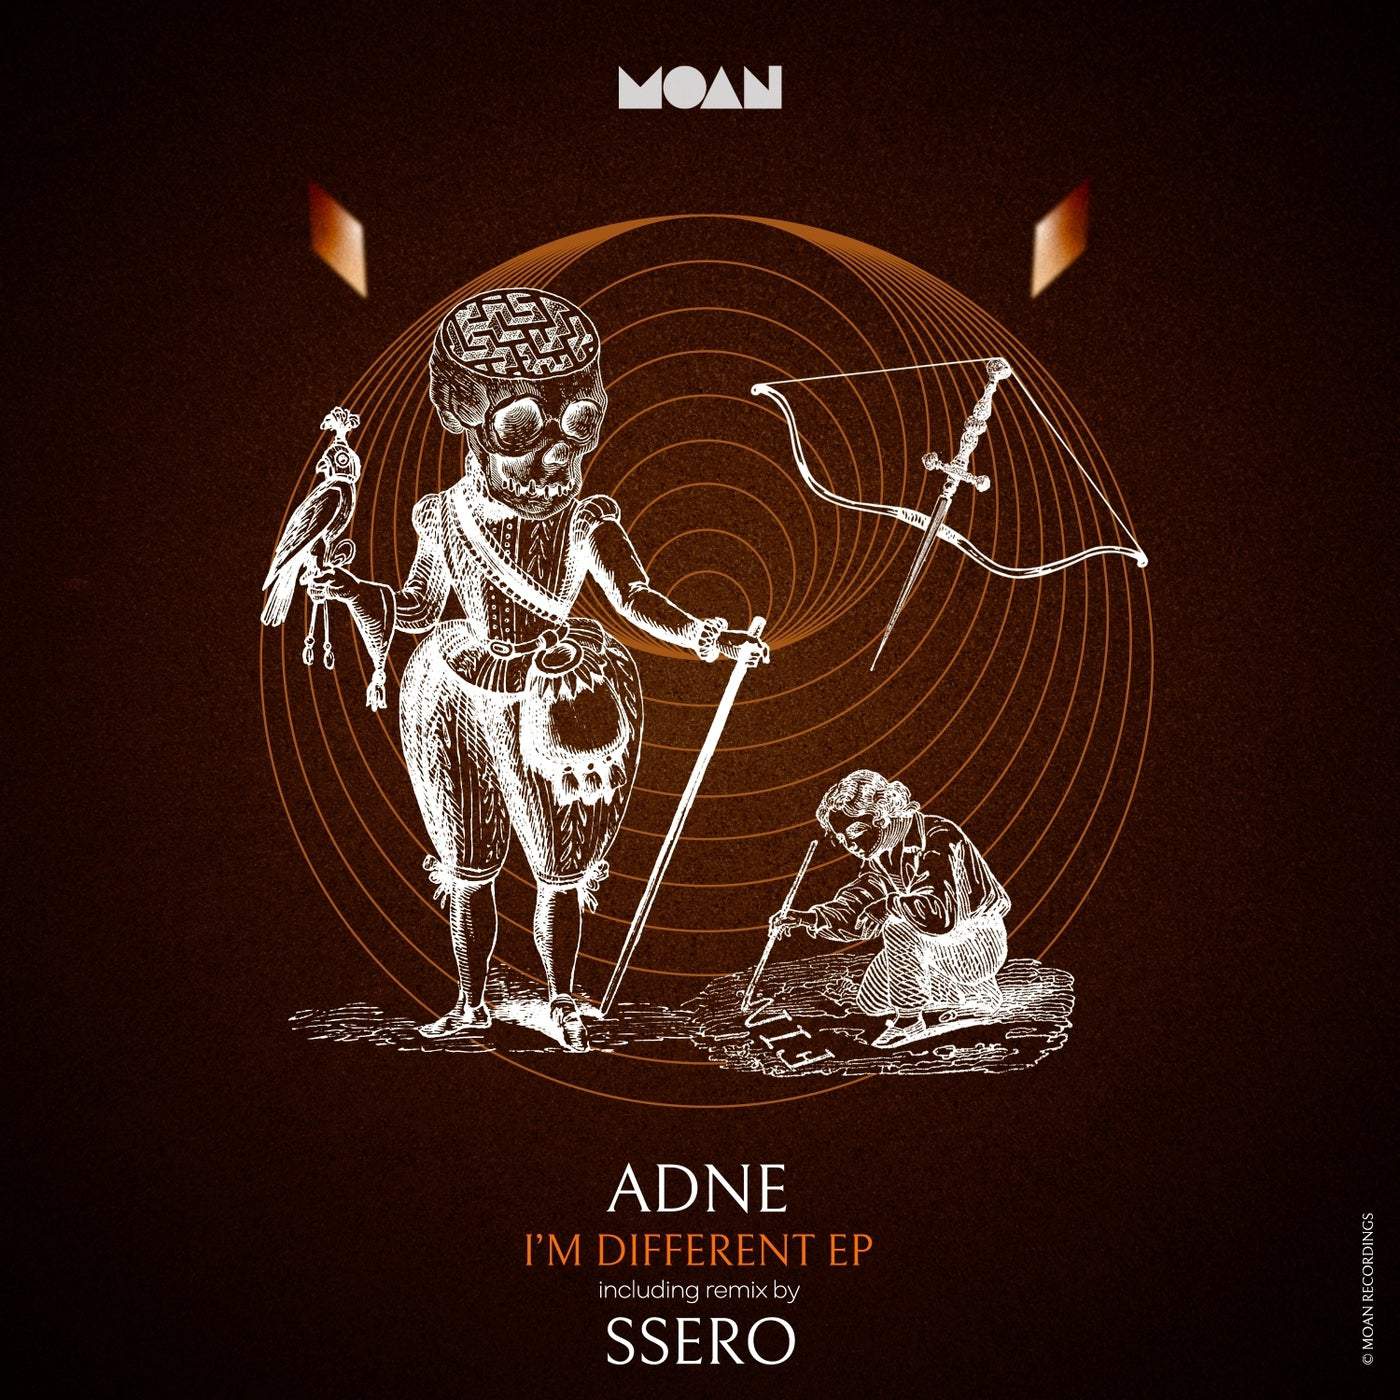 image cover: Adne - I'm Different EP on Moan